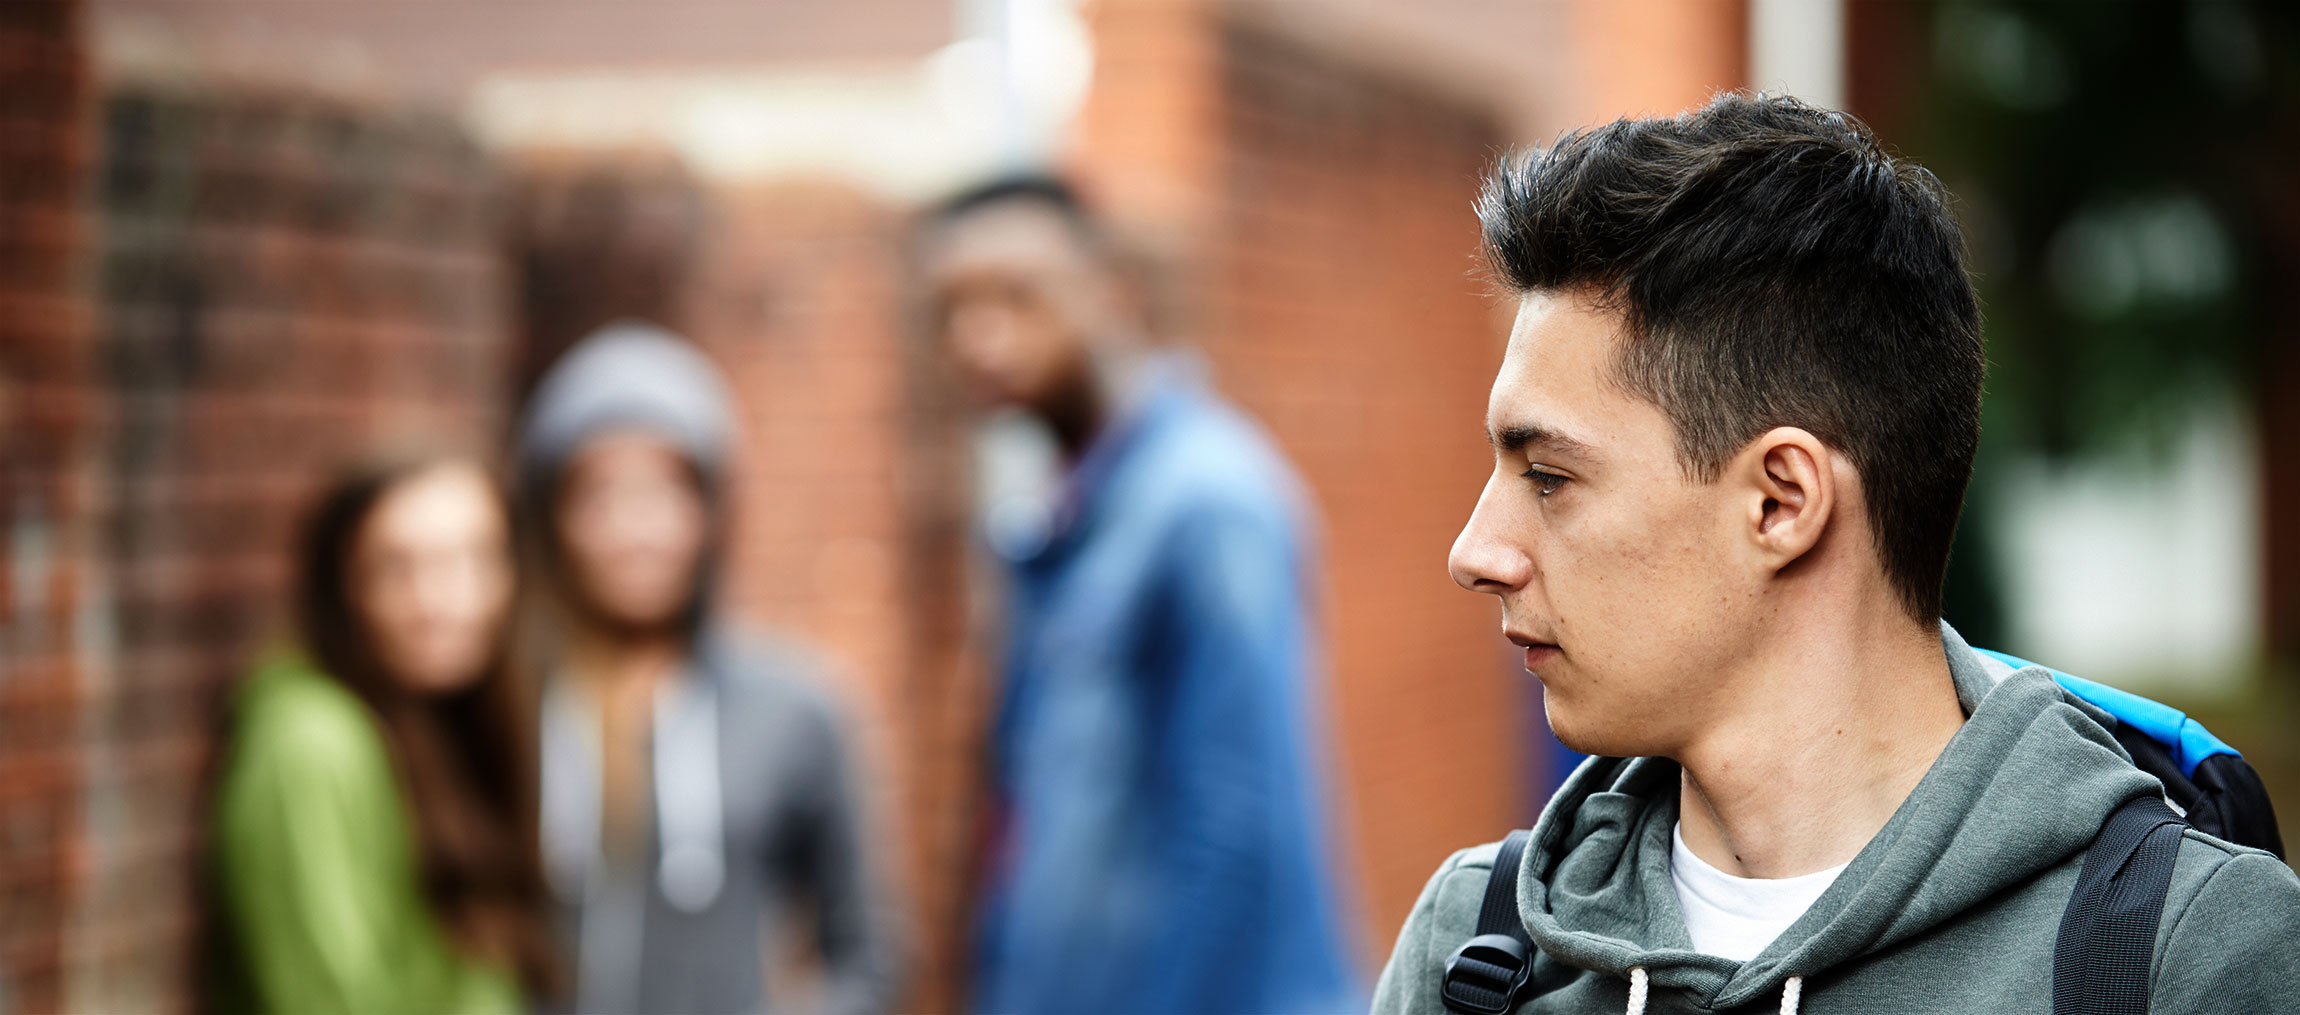 A young man peers over his shoulder at some other teenagers.